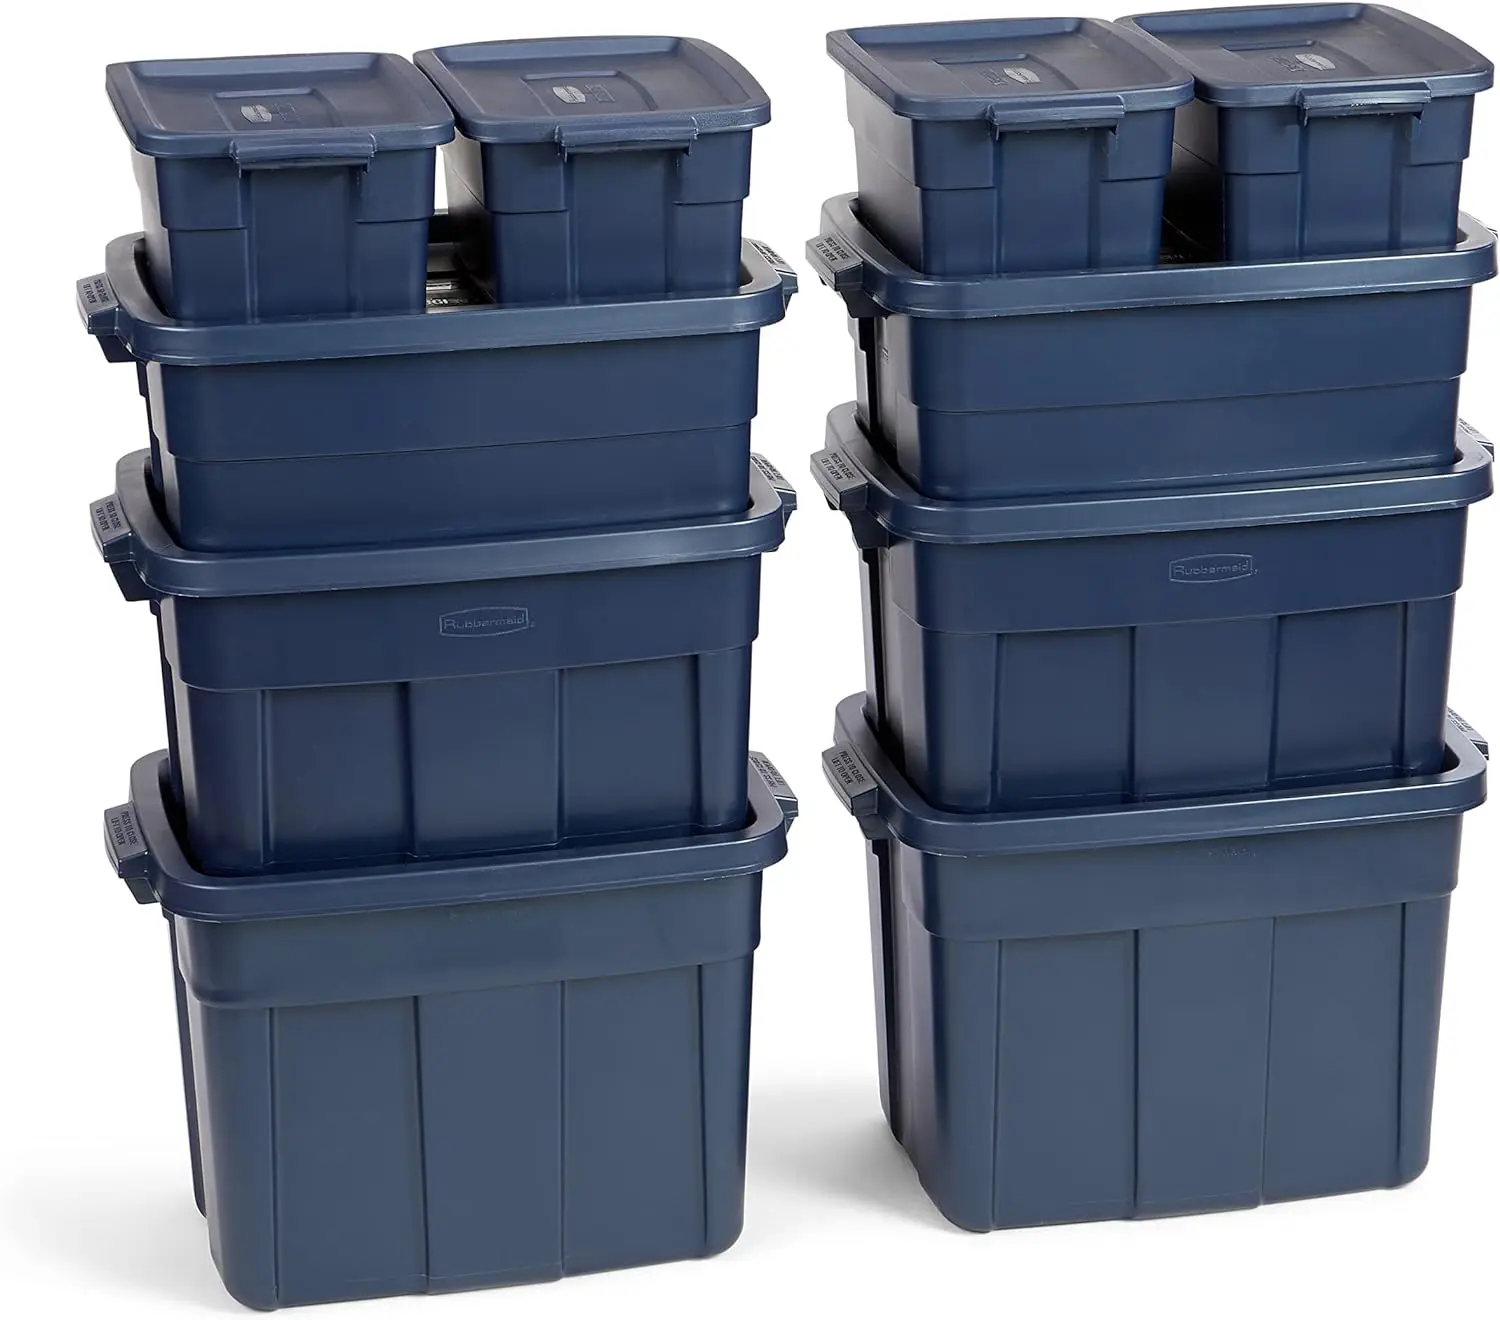 

Rubbermaid Roughneck️ Variety Pack Storage Totes Durable Stackable Storage Containers Great for Garage Storage Moving Boxes